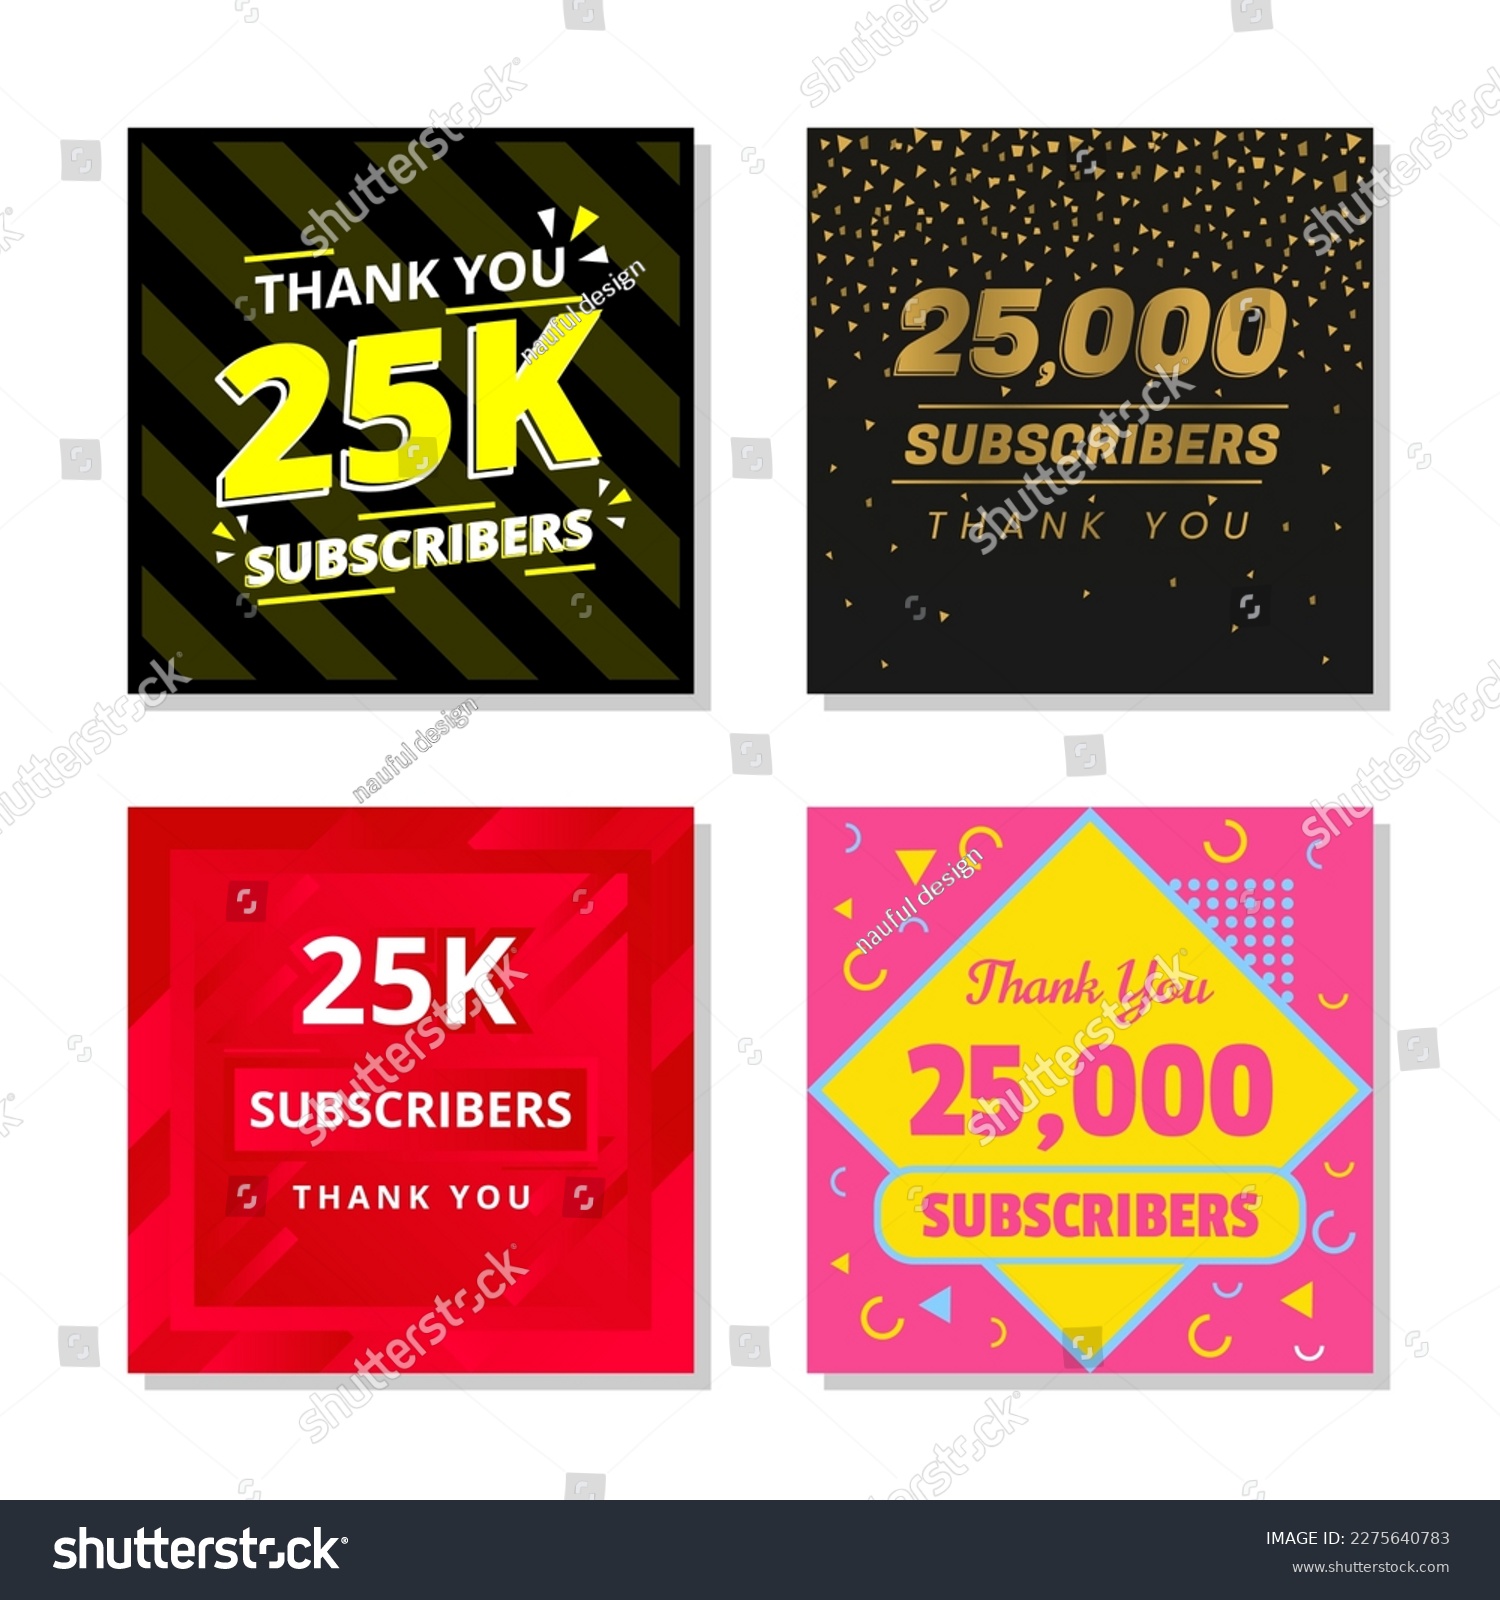 SVG of Thank you 25k subscribers set template vector. 25000 subscribers. 25k subscribers colorful design vector. thank you twenty five thousand subscribers svg